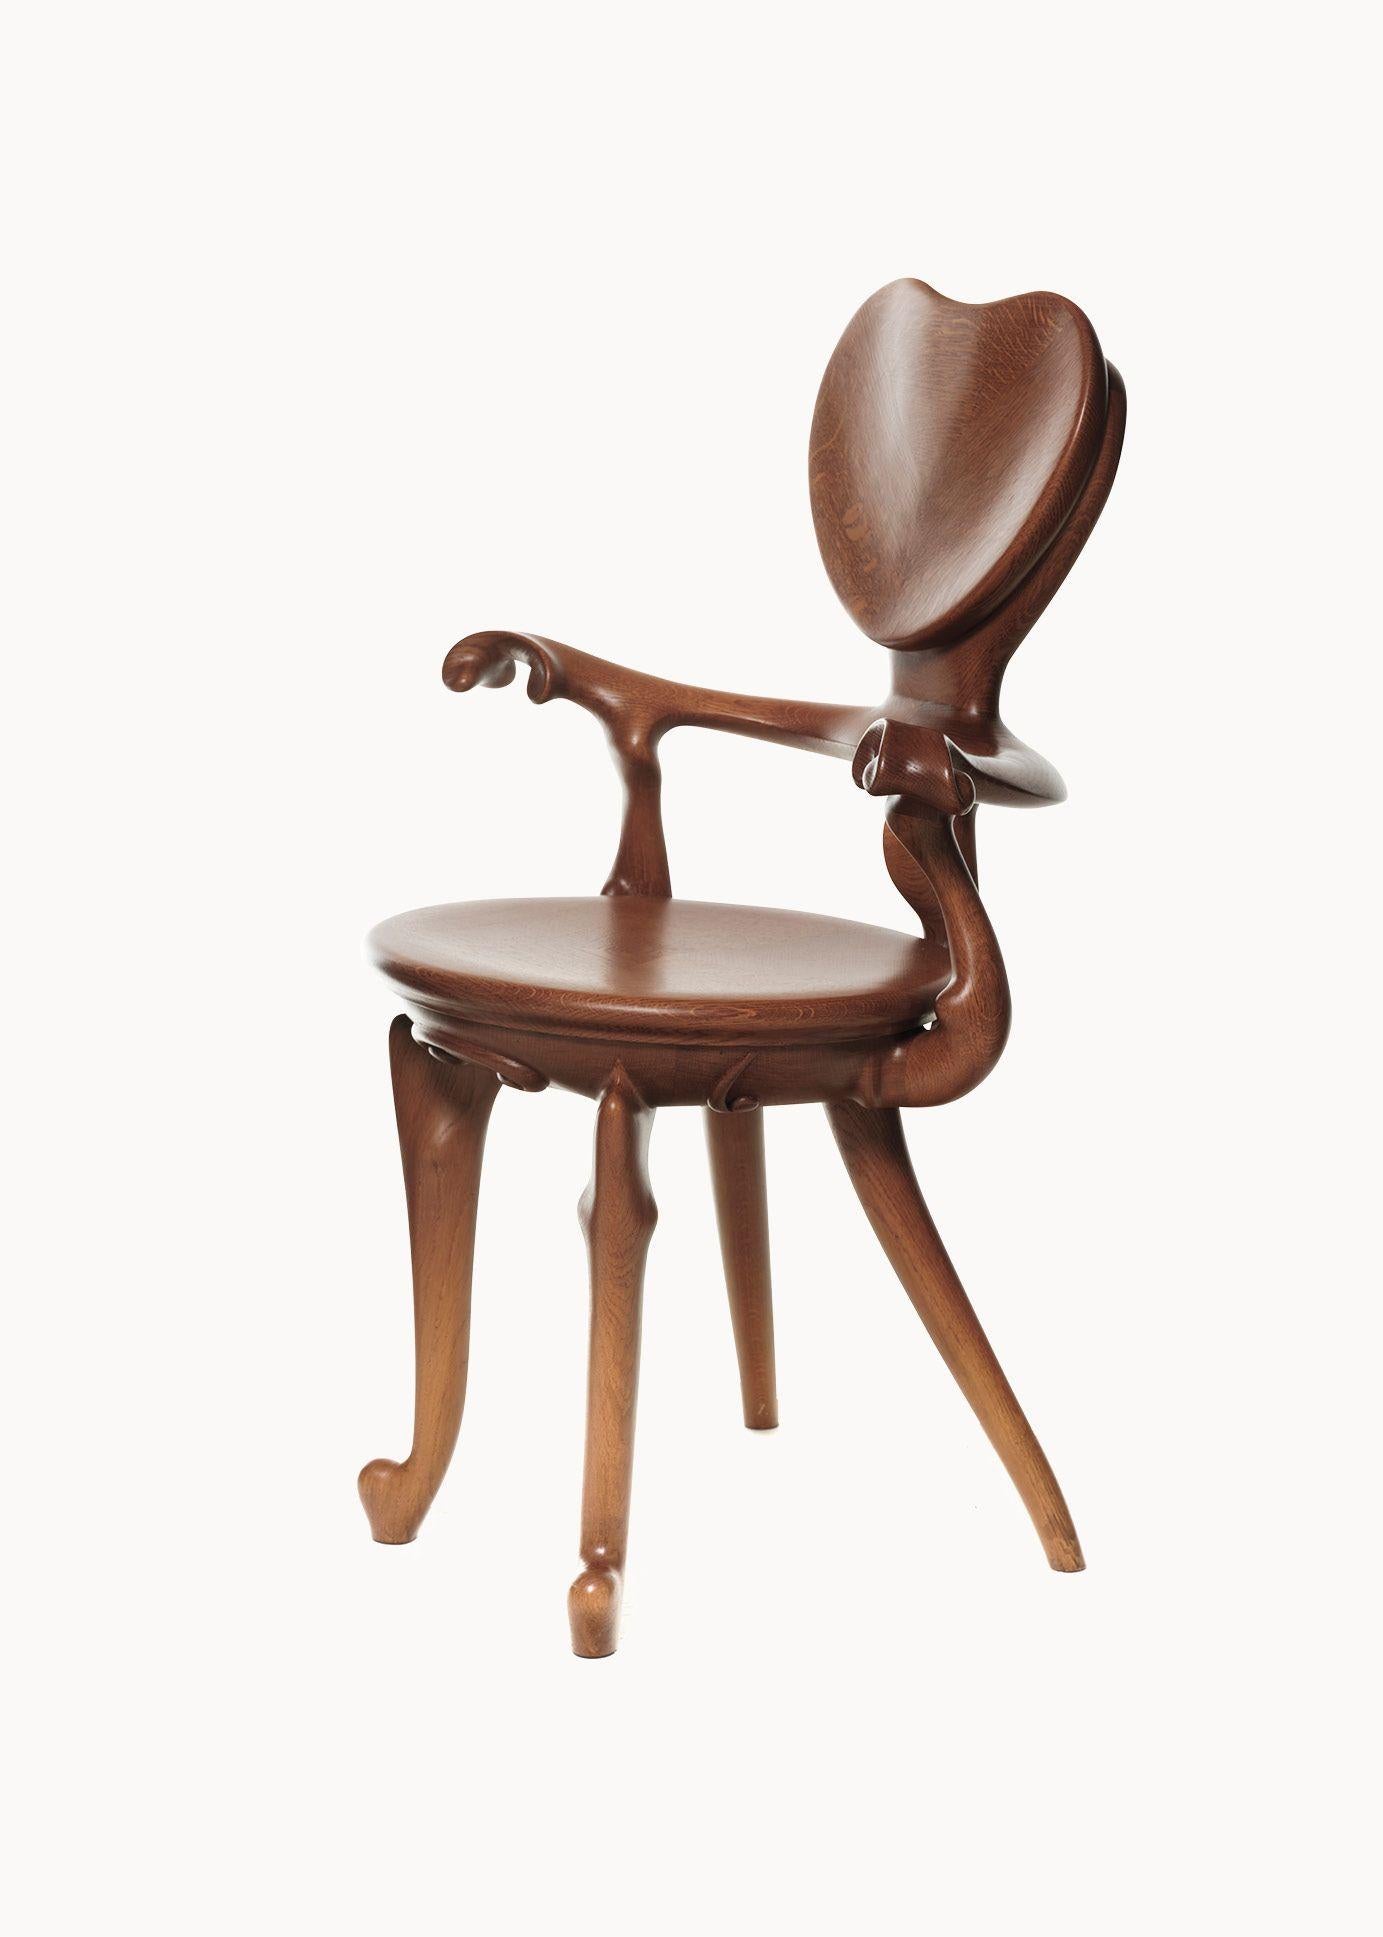 Antoni Gaudí is globally admired beyond the realm of architecture, entering into pieces like the Calvet armchair. Designed in 1900-1901 for the Calvet House in Barcelona, the oak armchair is handcrafted the same way it was in Gaudi’s time. Five